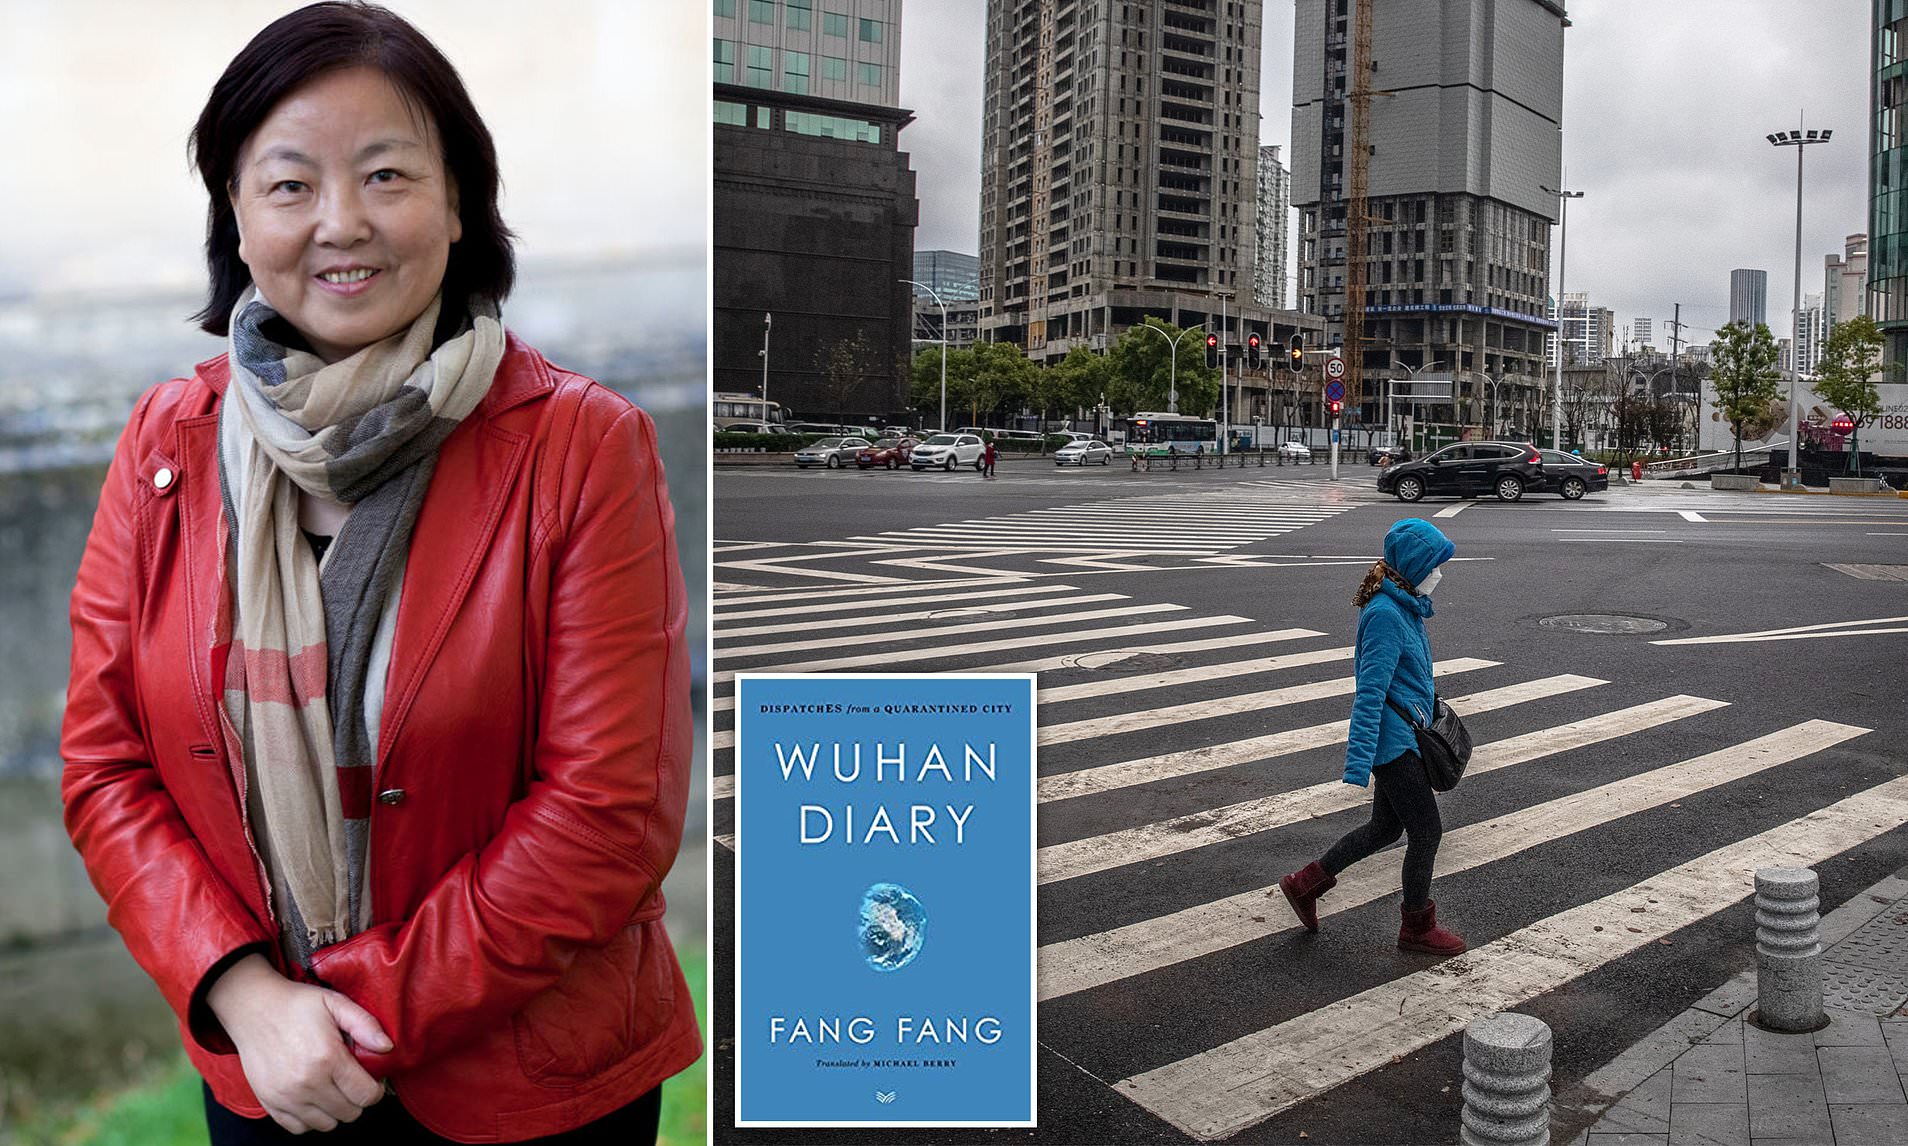 Author Fang Fang releases book about the time of lockdown in Wuhan city